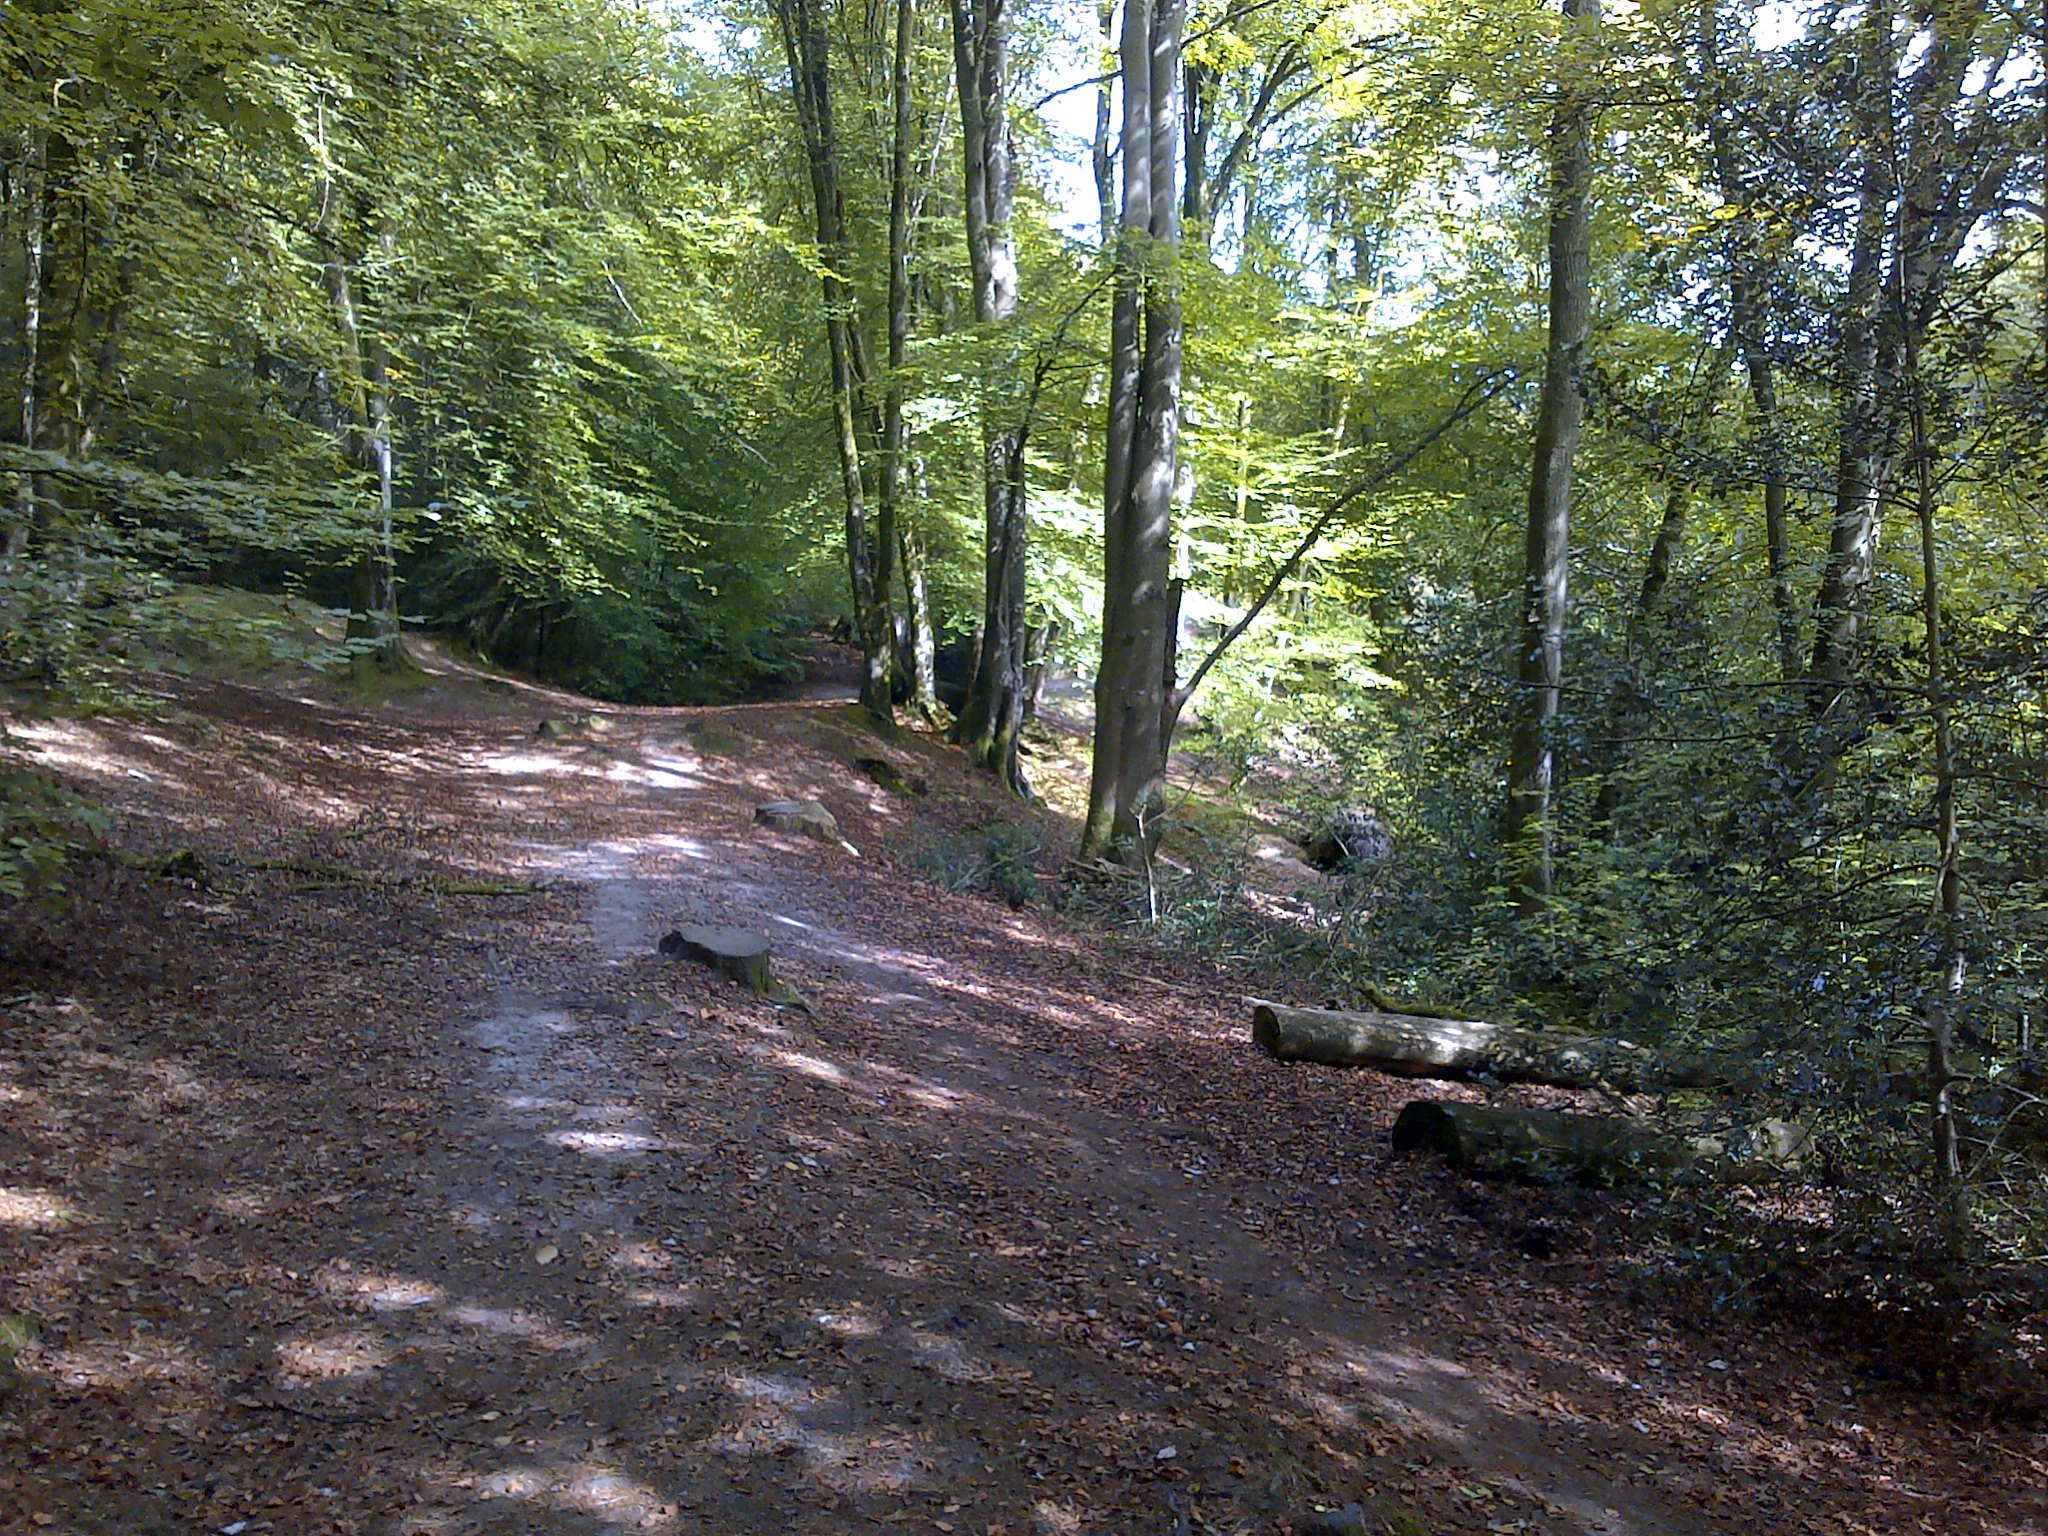 A path through woodland on a sunny early autumn day. Scattered leaves partially cover the path which is shaded by surrounding trees.